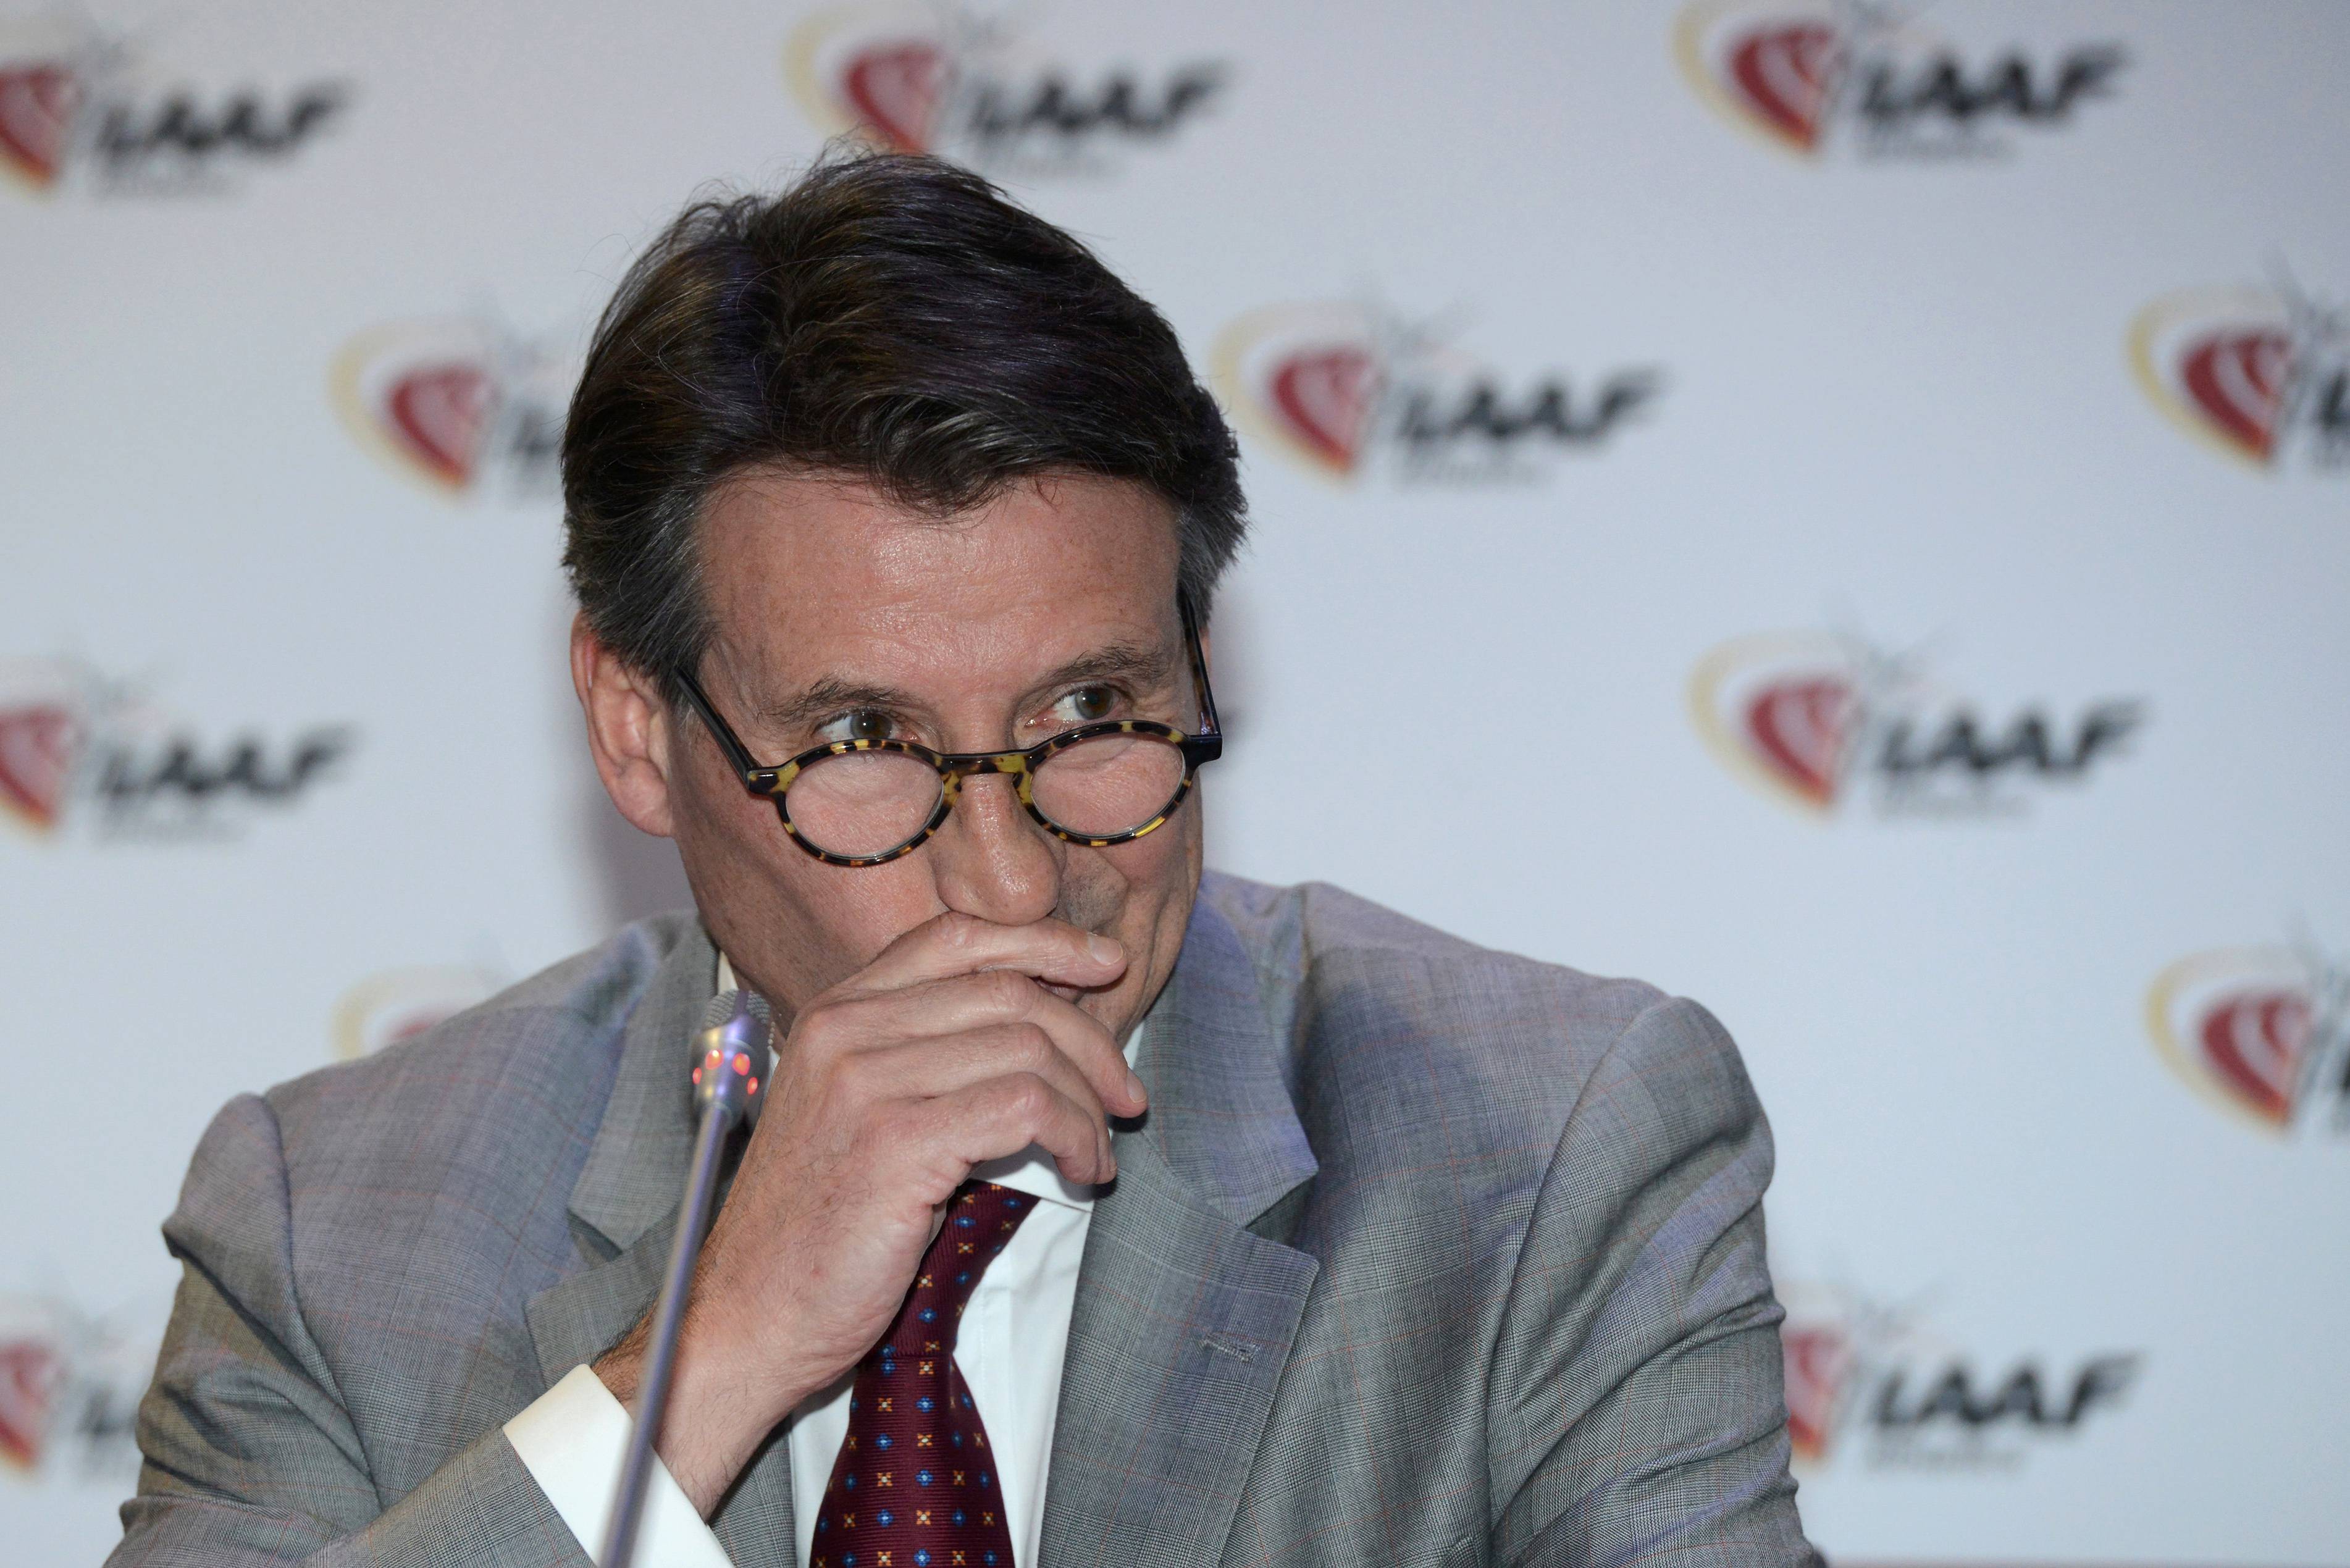 Sebastian Coe, IAAF's President, attends the IAAF press conference in Monaco, November 26, 2015. Coe, who leads the ruling body of world athletics, announced that he is stepping down from his paid ambassadorial role for the sportswear firm Nike, as he faced repeated questions about a potential conflict of interest. REUTERS/Jean-Pierre Amet